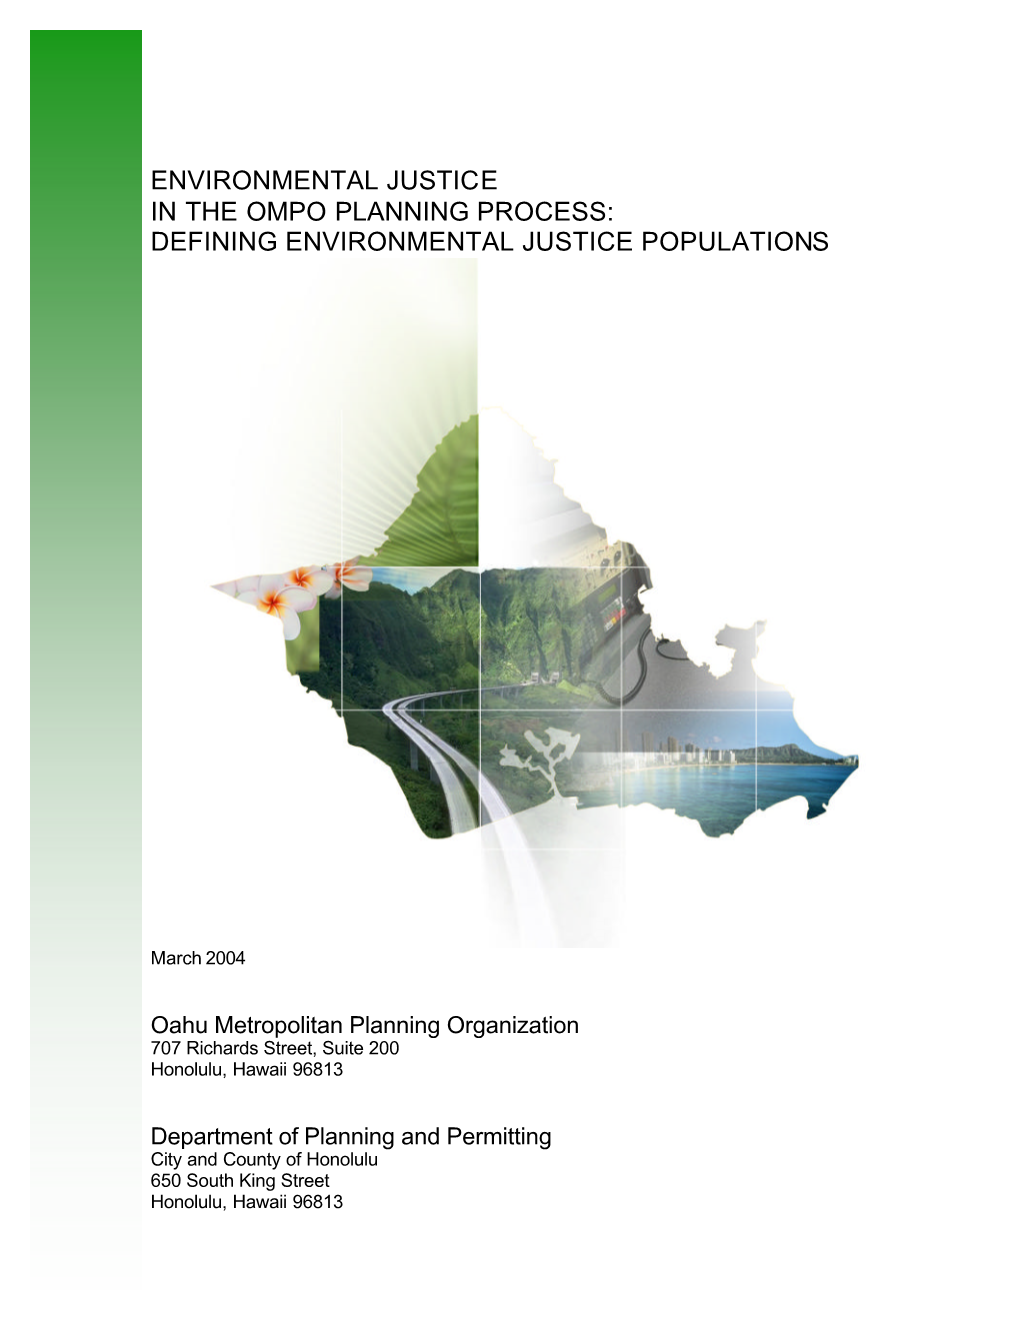 Environmental Justice in the Ompo Planning Process: Defining Environmental Justice Populations